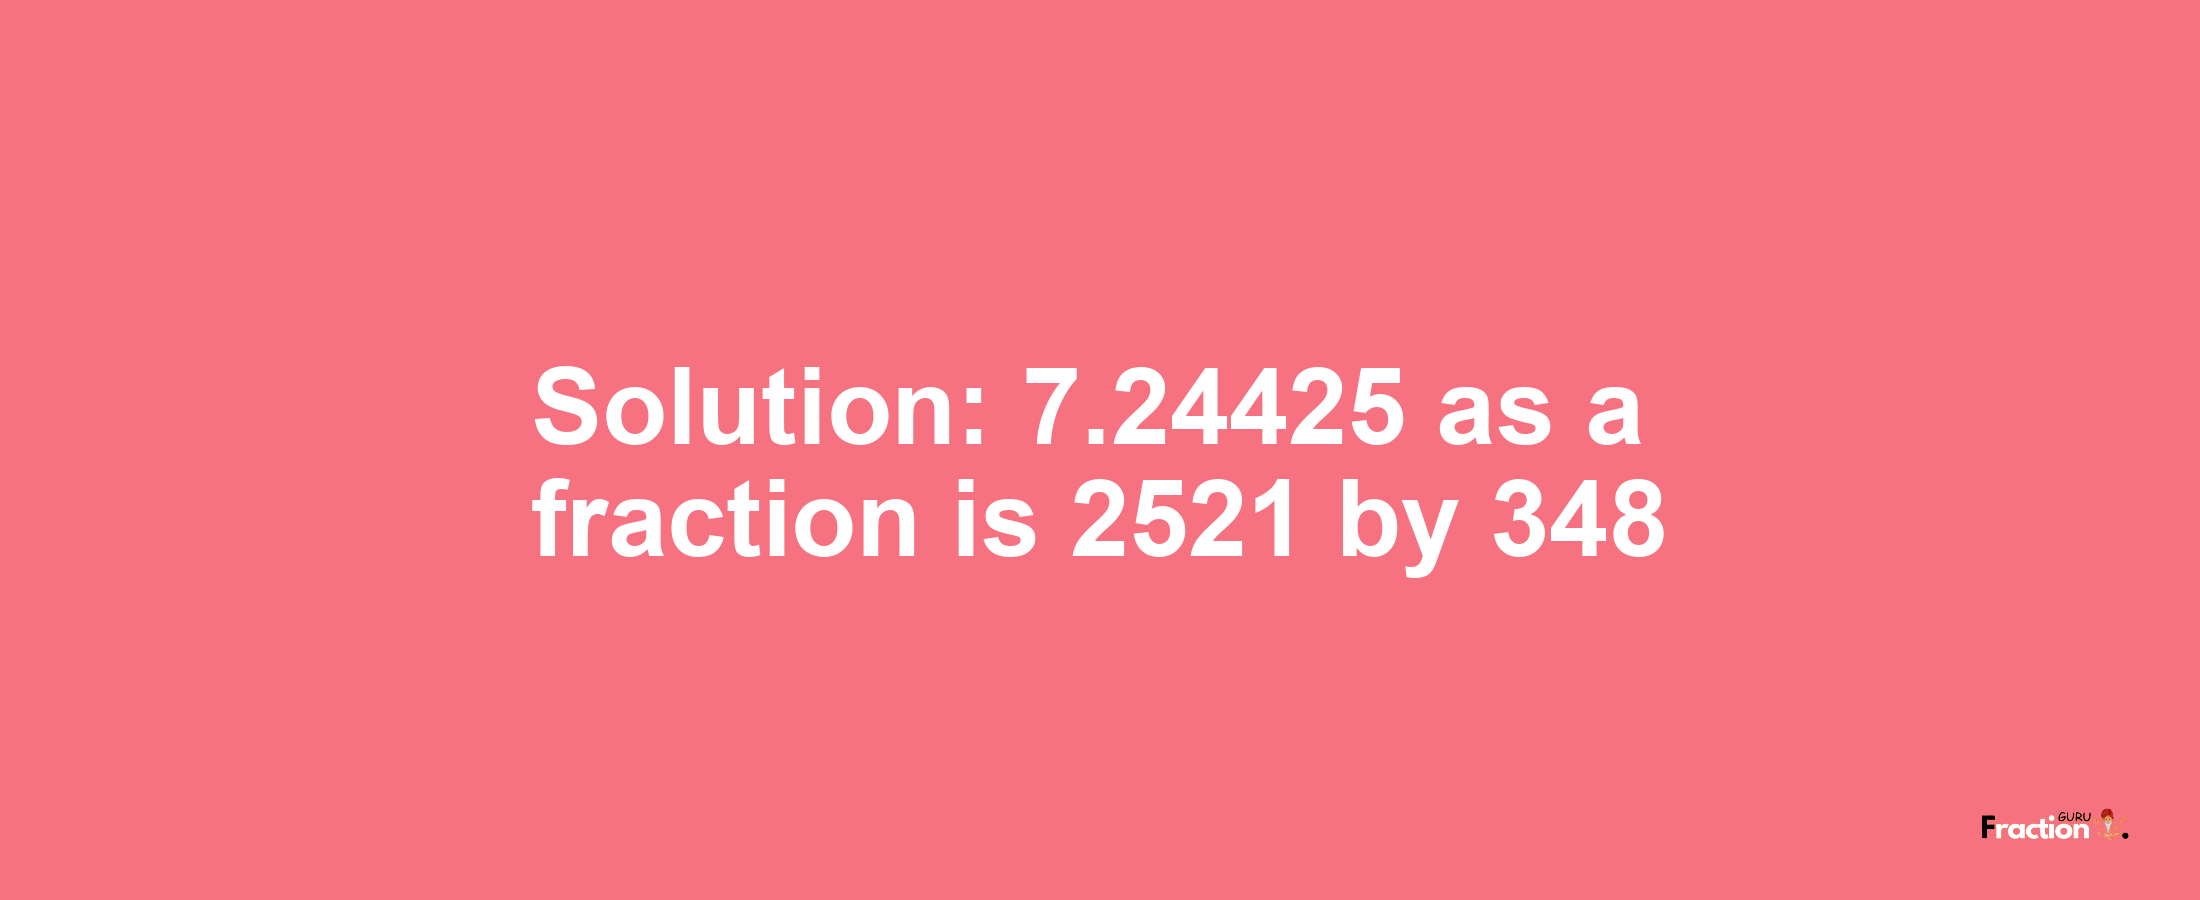 Solution:7.24425 as a fraction is 2521/348